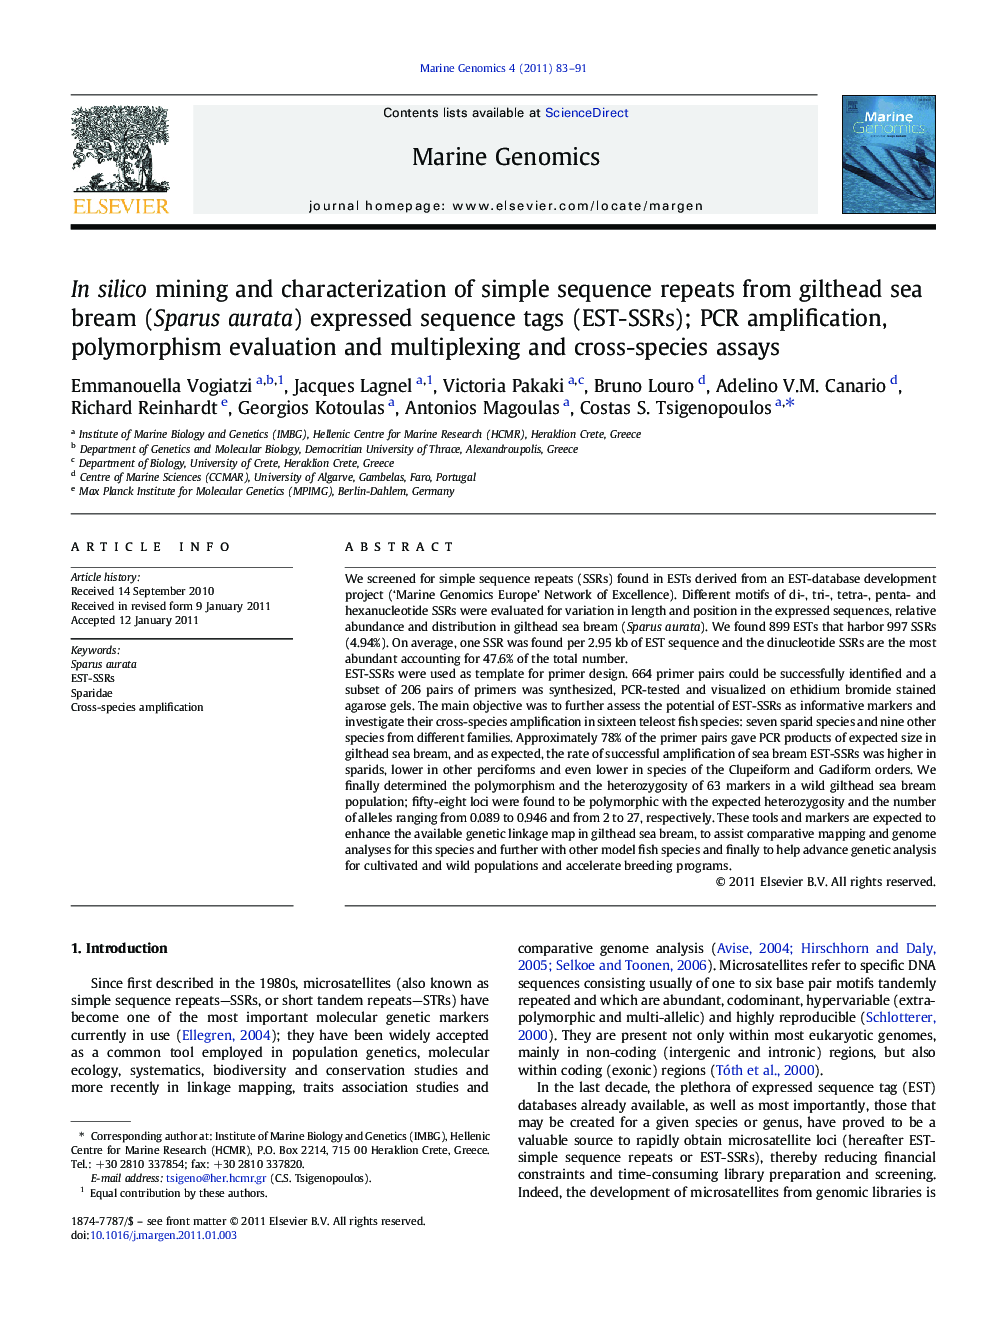 In silico mining and characterization of simple sequence repeats from gilthead sea bream (Sparus aurata) expressed sequence tags (EST-SSRs); PCR amplification, polymorphism evaluation and multiplexing and cross-species assays